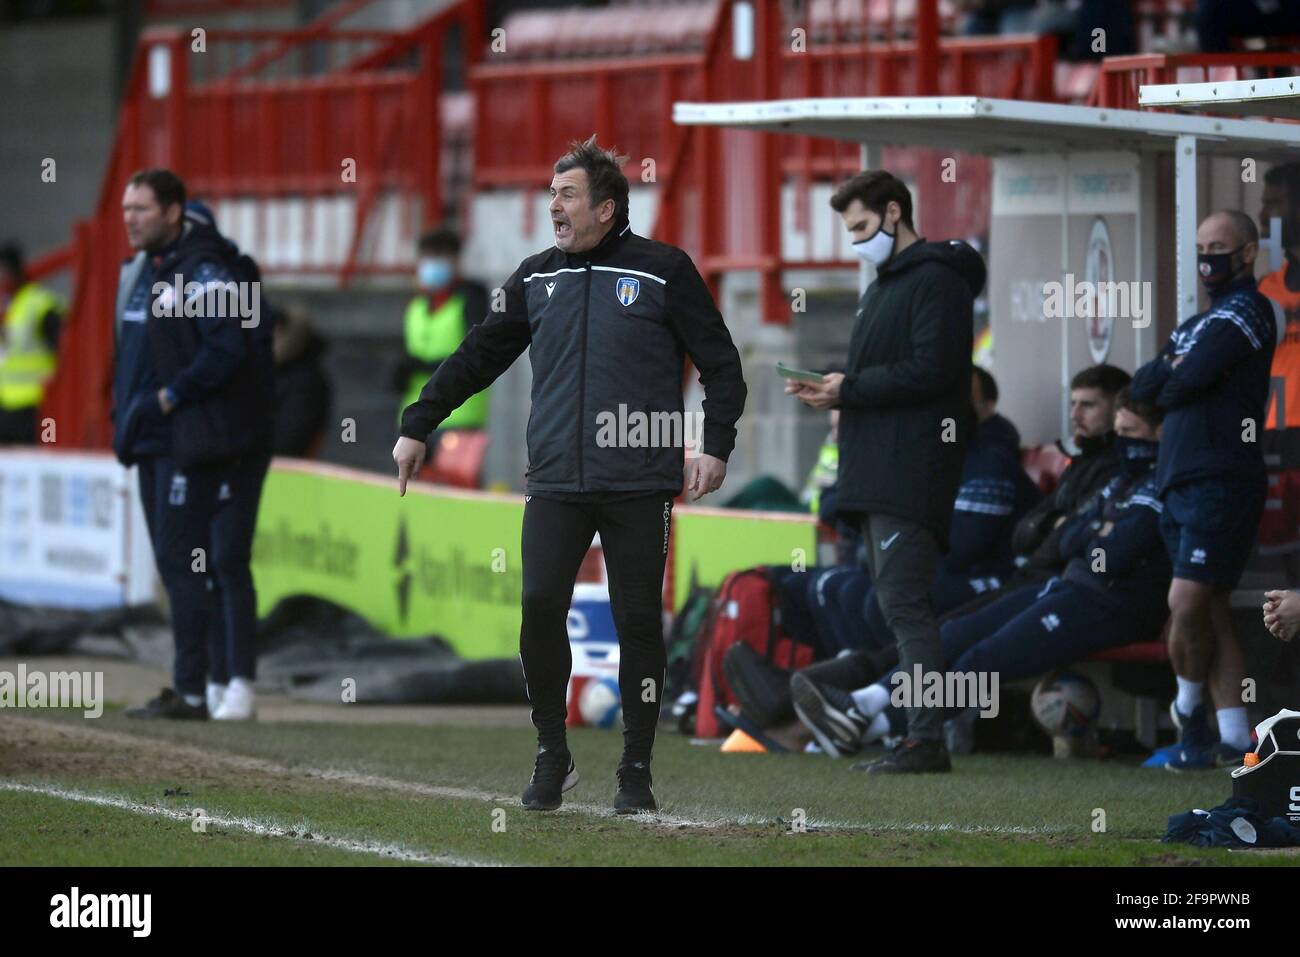 Colchester United Manager Steve Ball - Crawley Town v Colchester United, Sky Bet League Two, The People's Pension Stadium, Crawley, UK - 20th February 2020  Editorial Use Only - DataCo restrictions apply Stock Photo